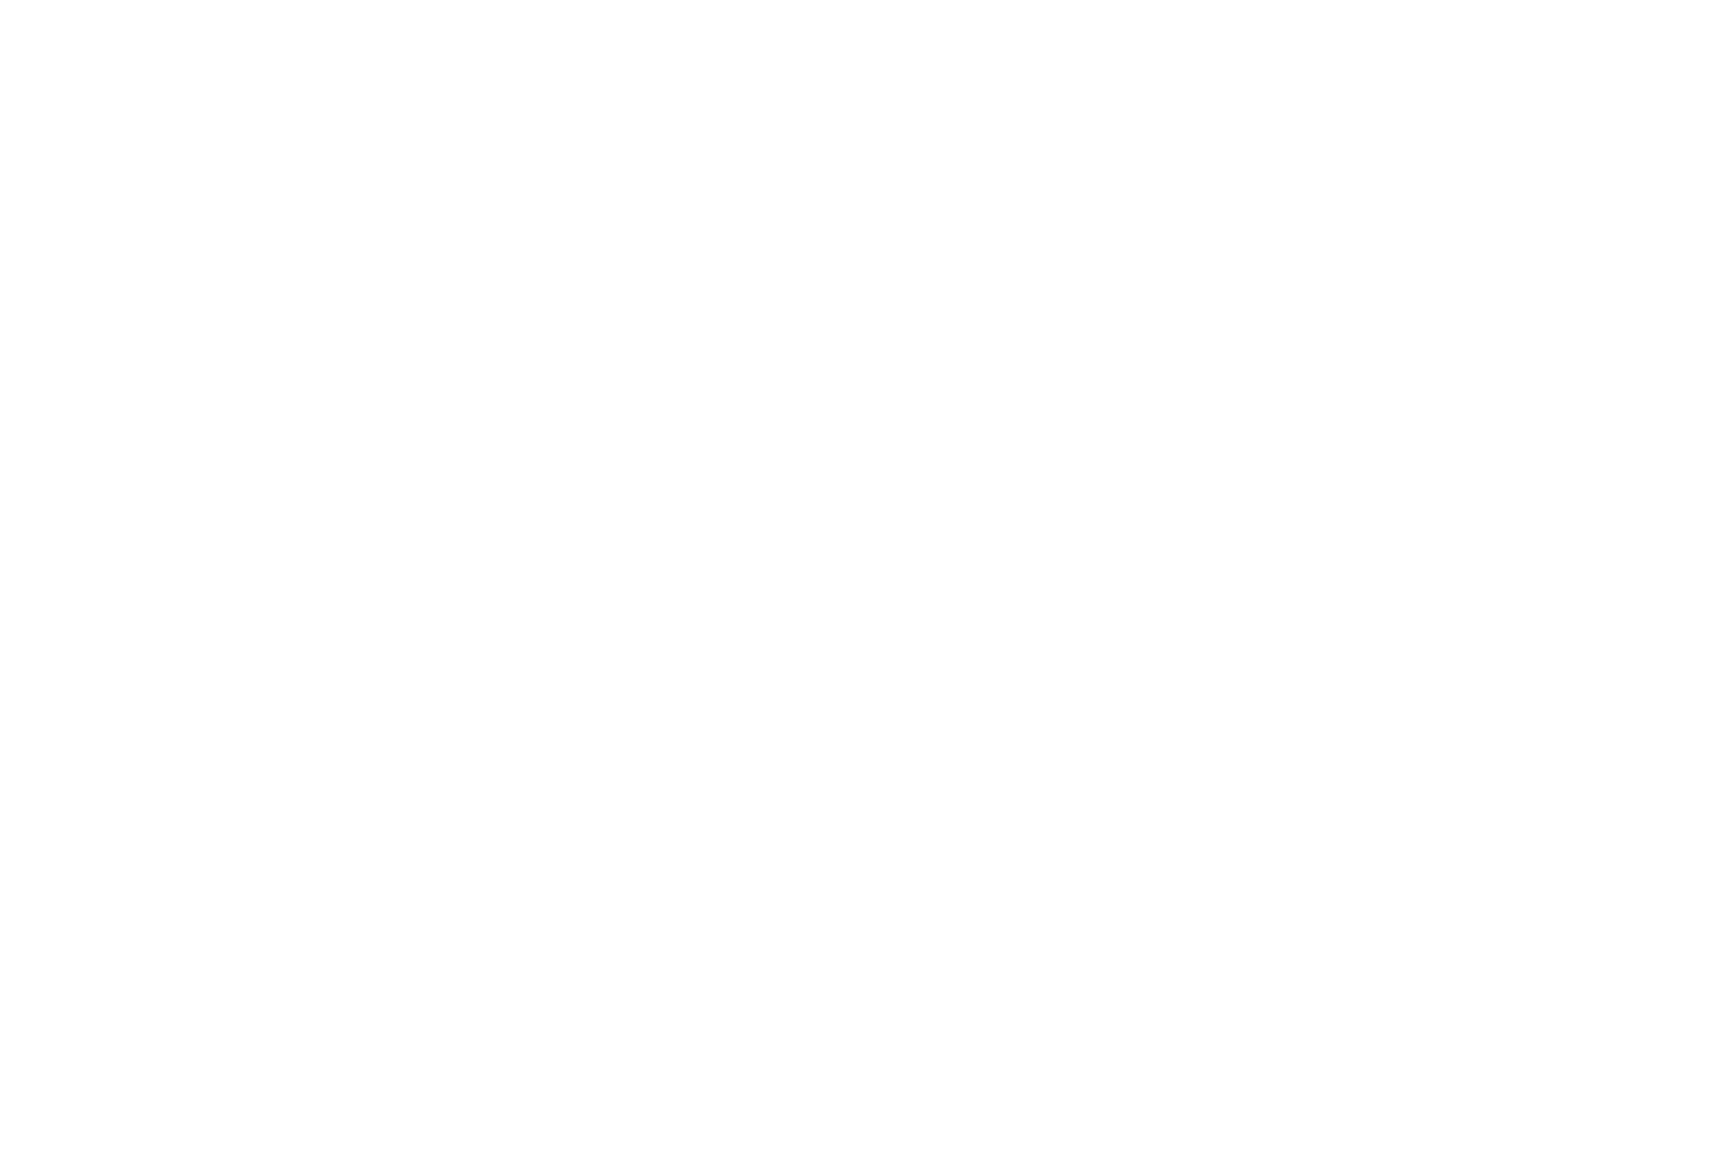 MUSIC VIDEO - 4th Dimension Independent Film Festival Bali - 2022